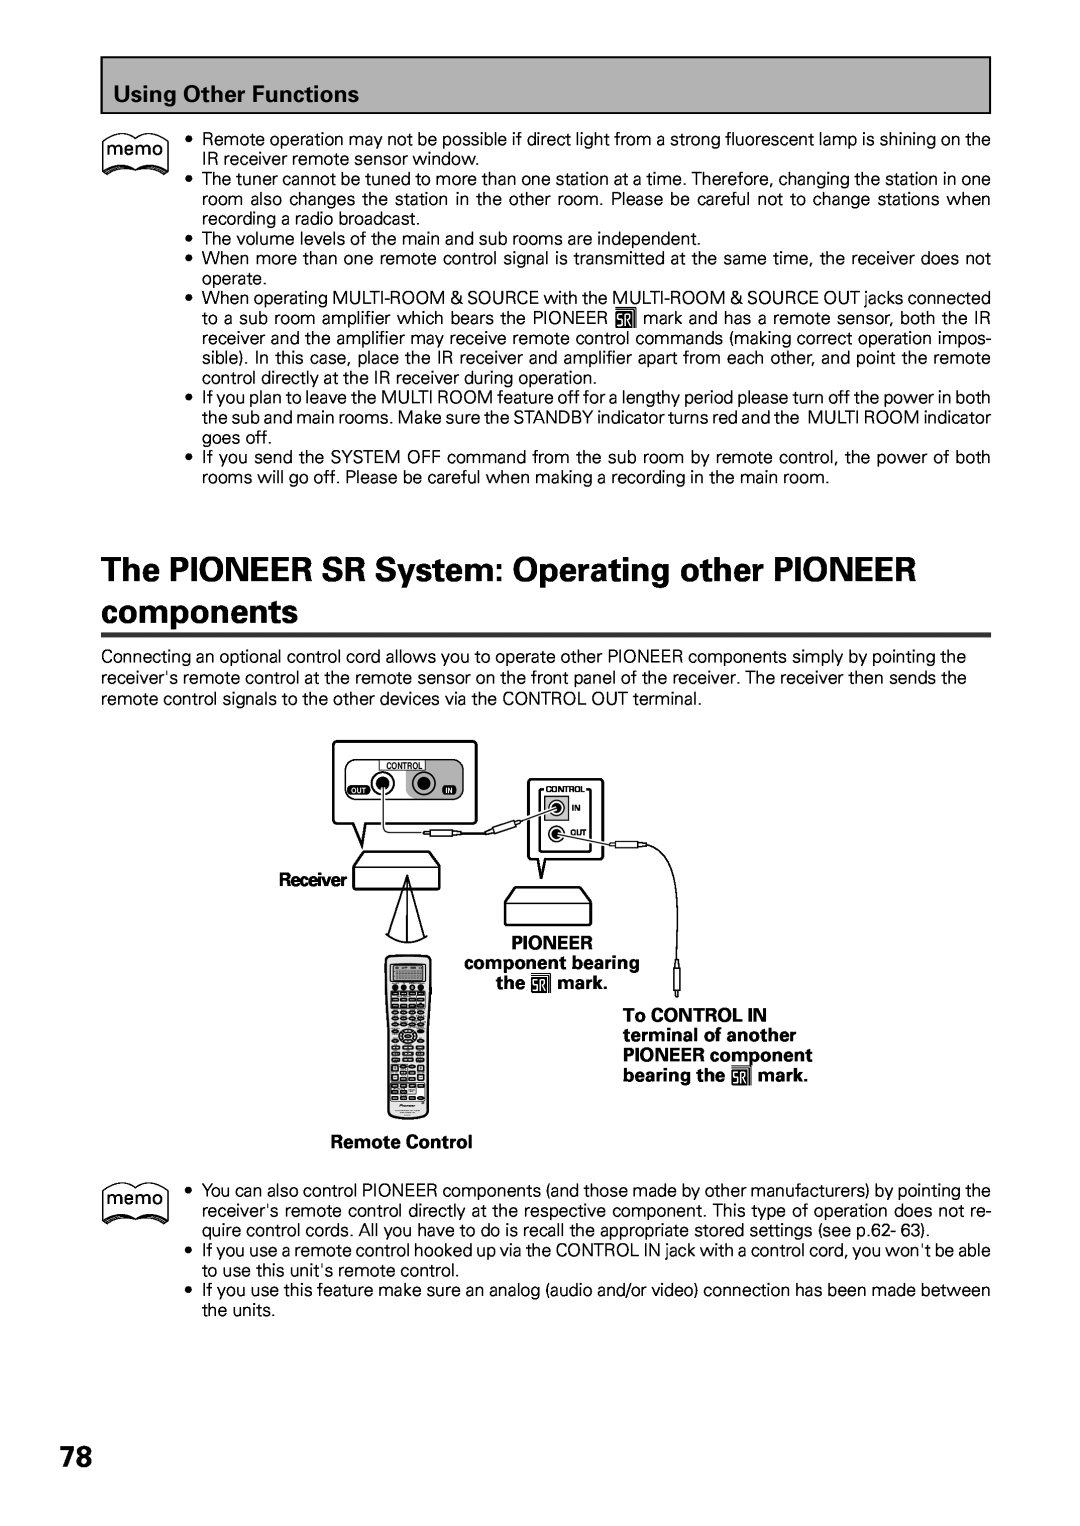 Pioneer VSX-47TX manual Receiver, PIONEER component bearing the Î mark, Remote Control 